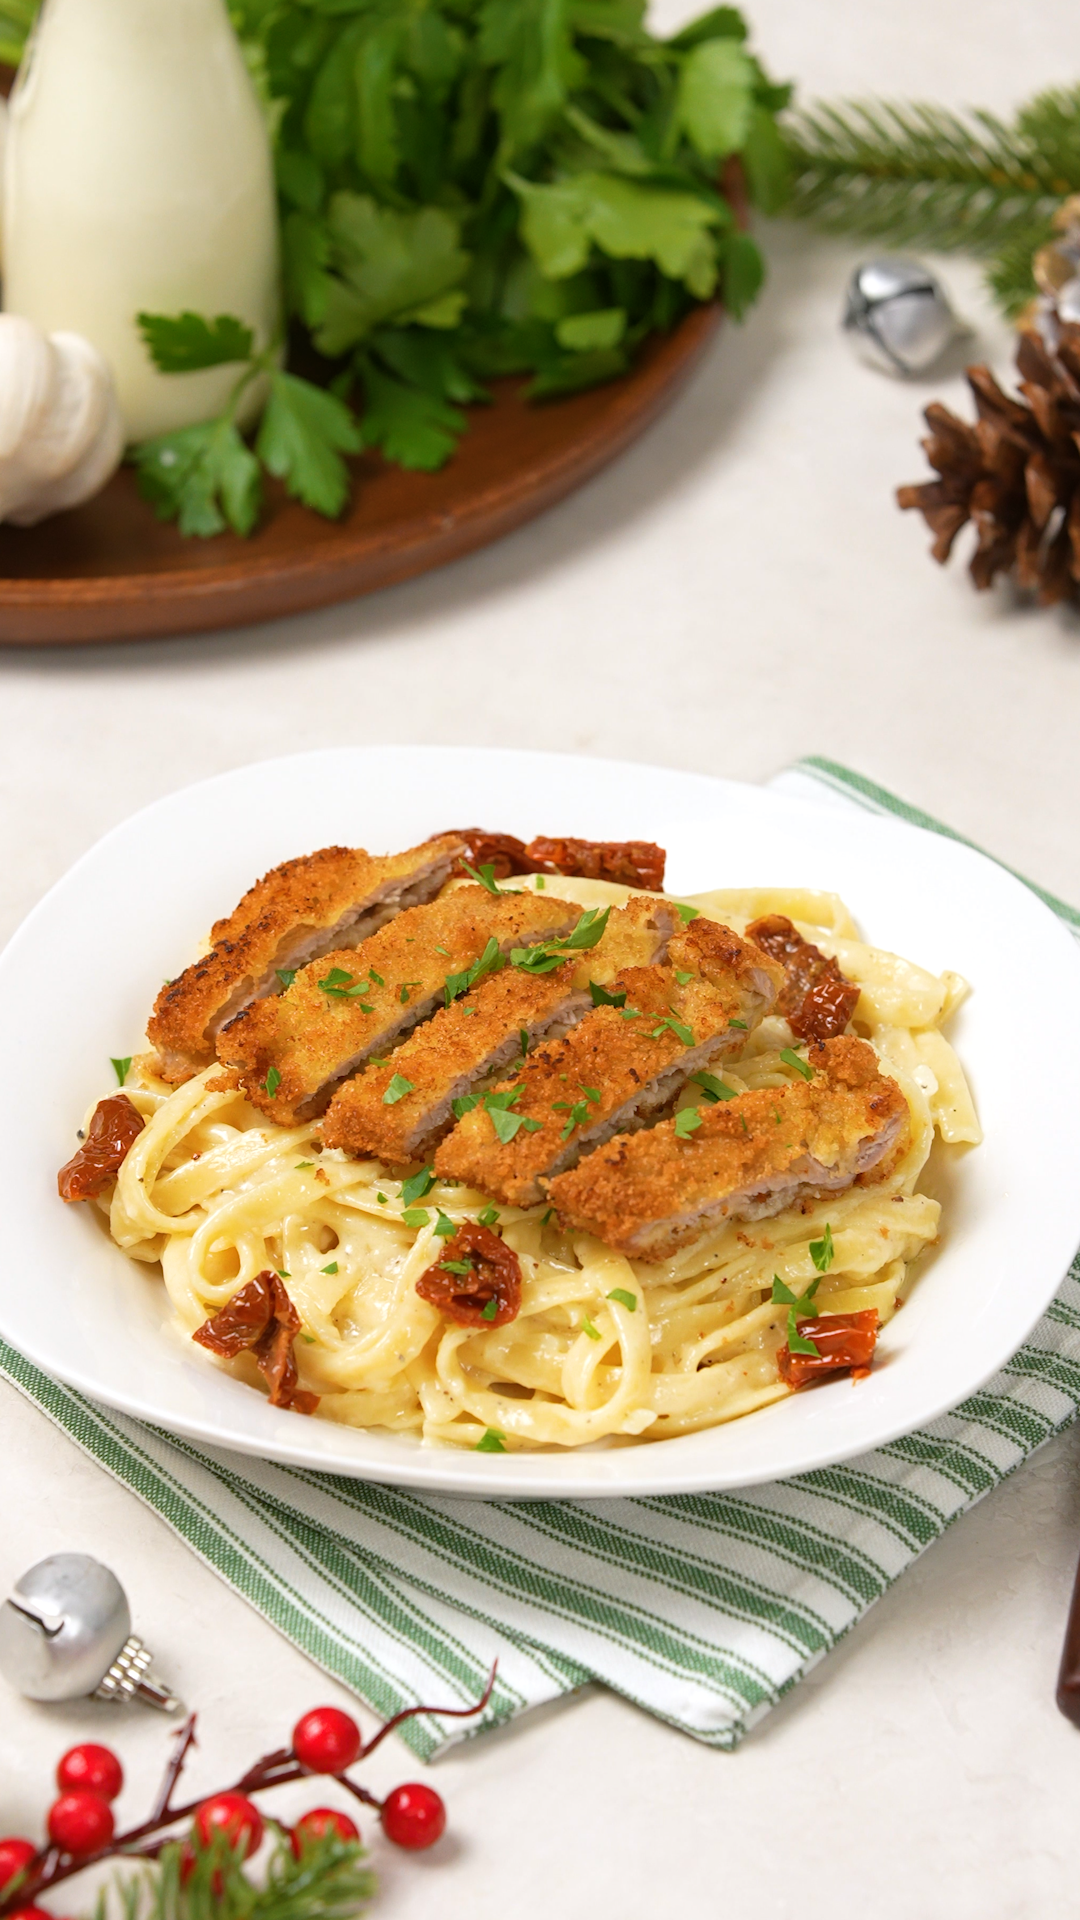 Breaded cutlets sit on a bed of linguine tossed in a garlic cream sauce and garnished with sundried tomatoes